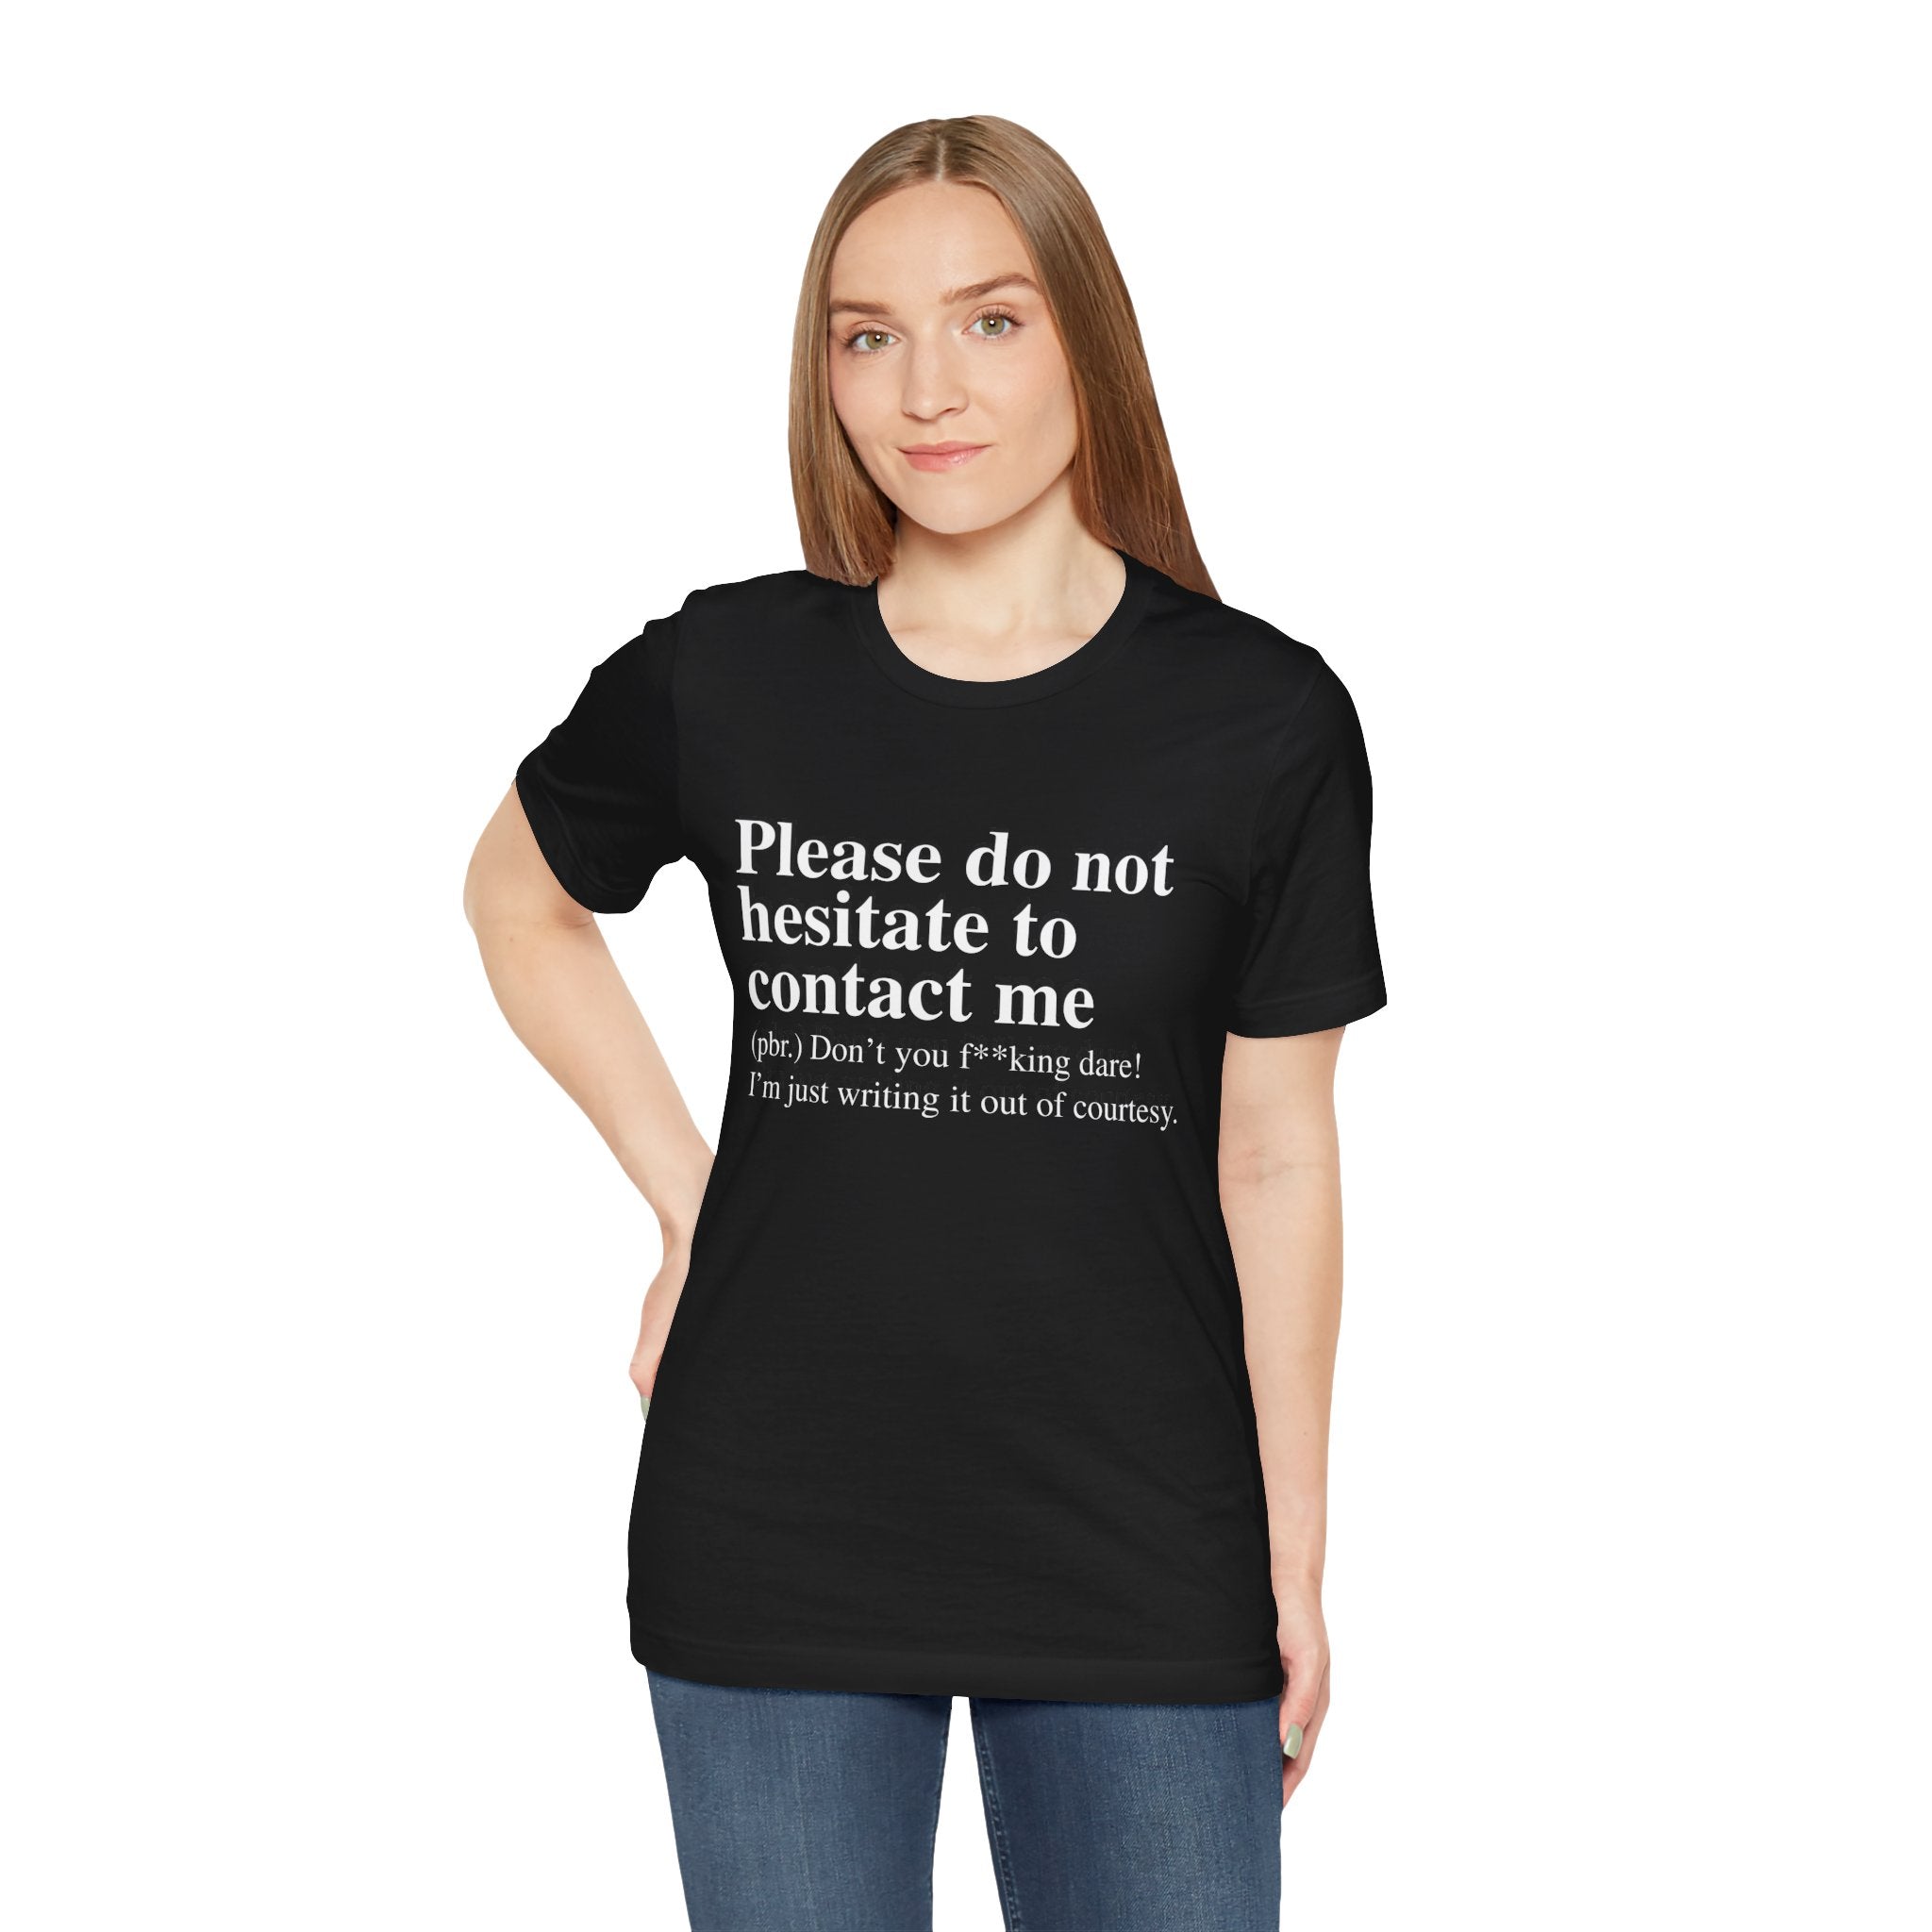 A woman in a black unisex Please Do Not Hesitate to Contact Me T-Shirt with a humorous text that reads "please do not hesitate to contact me (p.s. don't you fking dare! I'm just writing it.